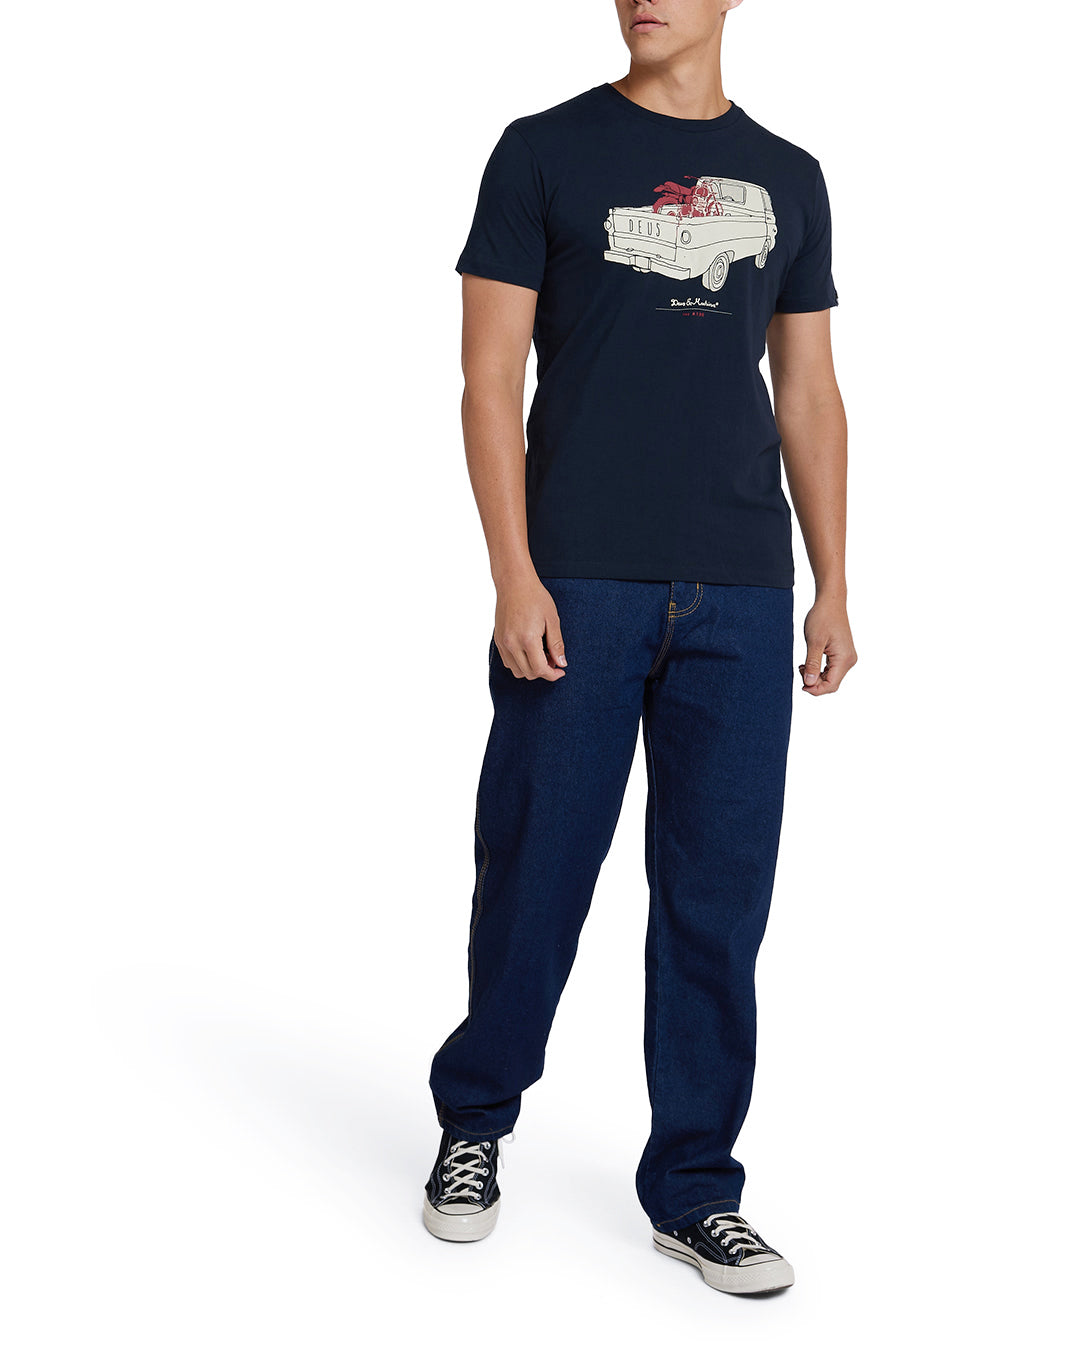 The A100 Tee - Navy|Model